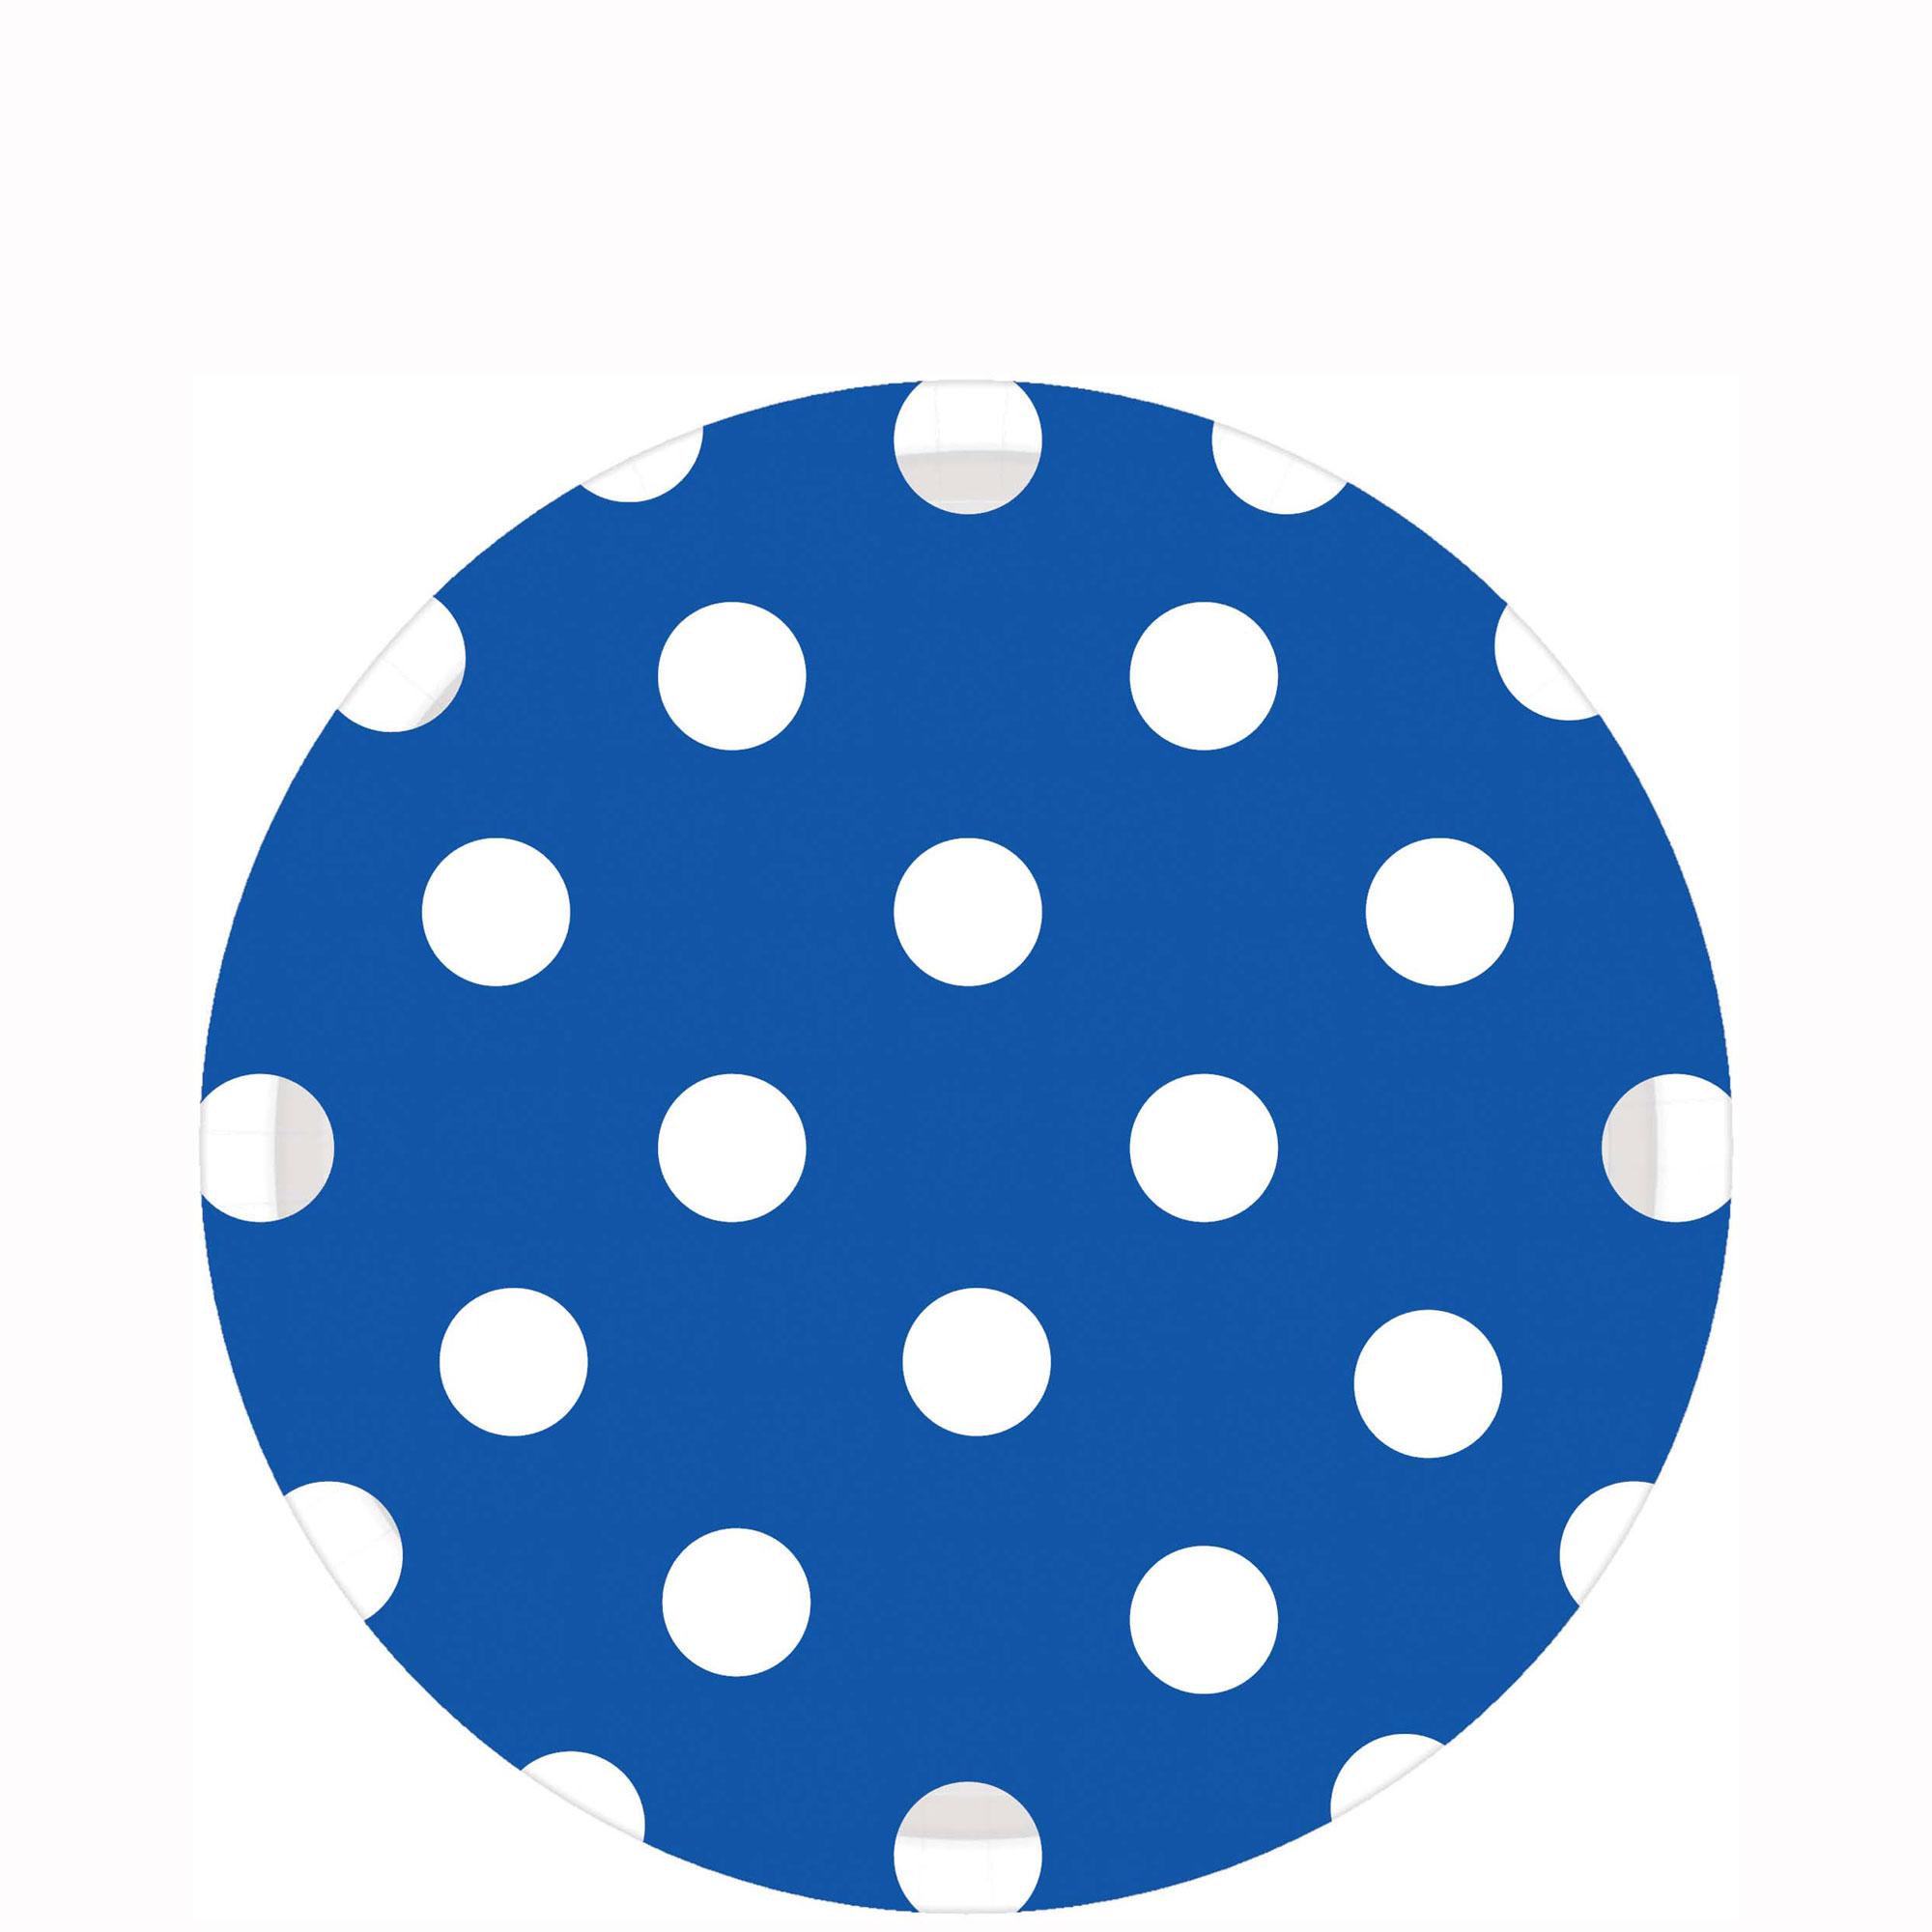 Bright Royal Blue Dots Round Party Paper Plates 7in 8pcs Printed Tableware - Party Centre